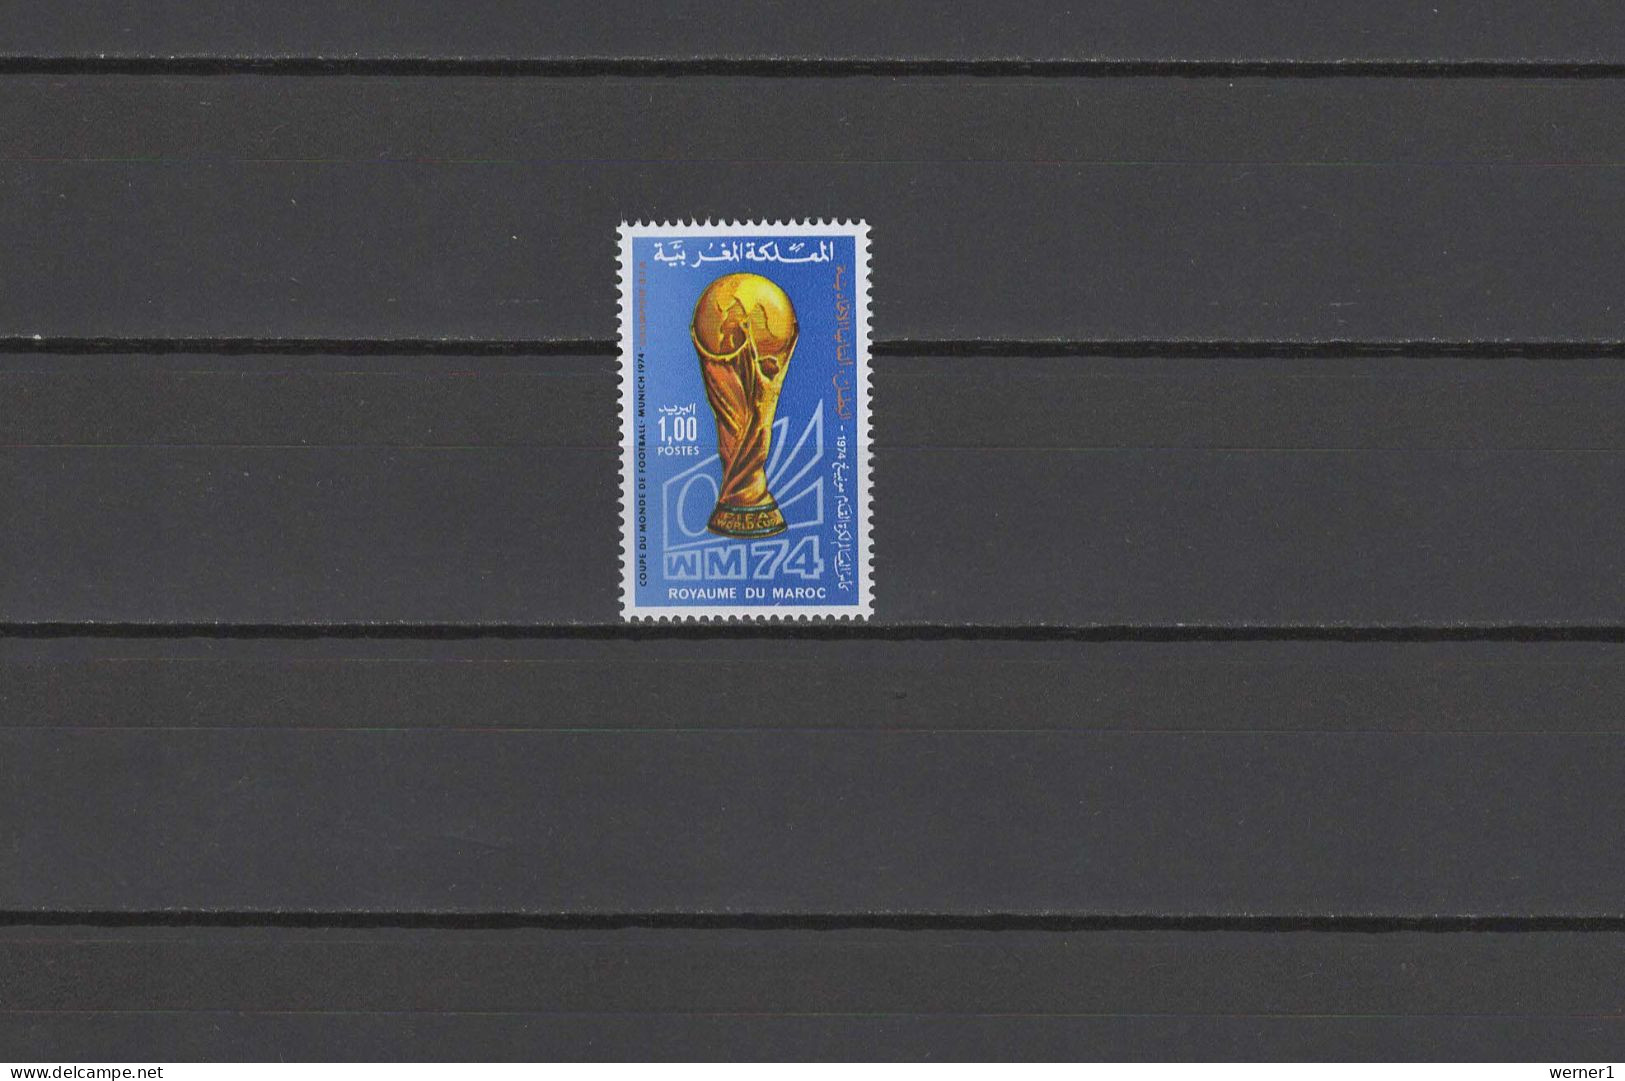 Morocco 1974 Football Soccer World Cup Stamp With Golden Winners Overprint MNH -scarce- - 1974 – West Germany